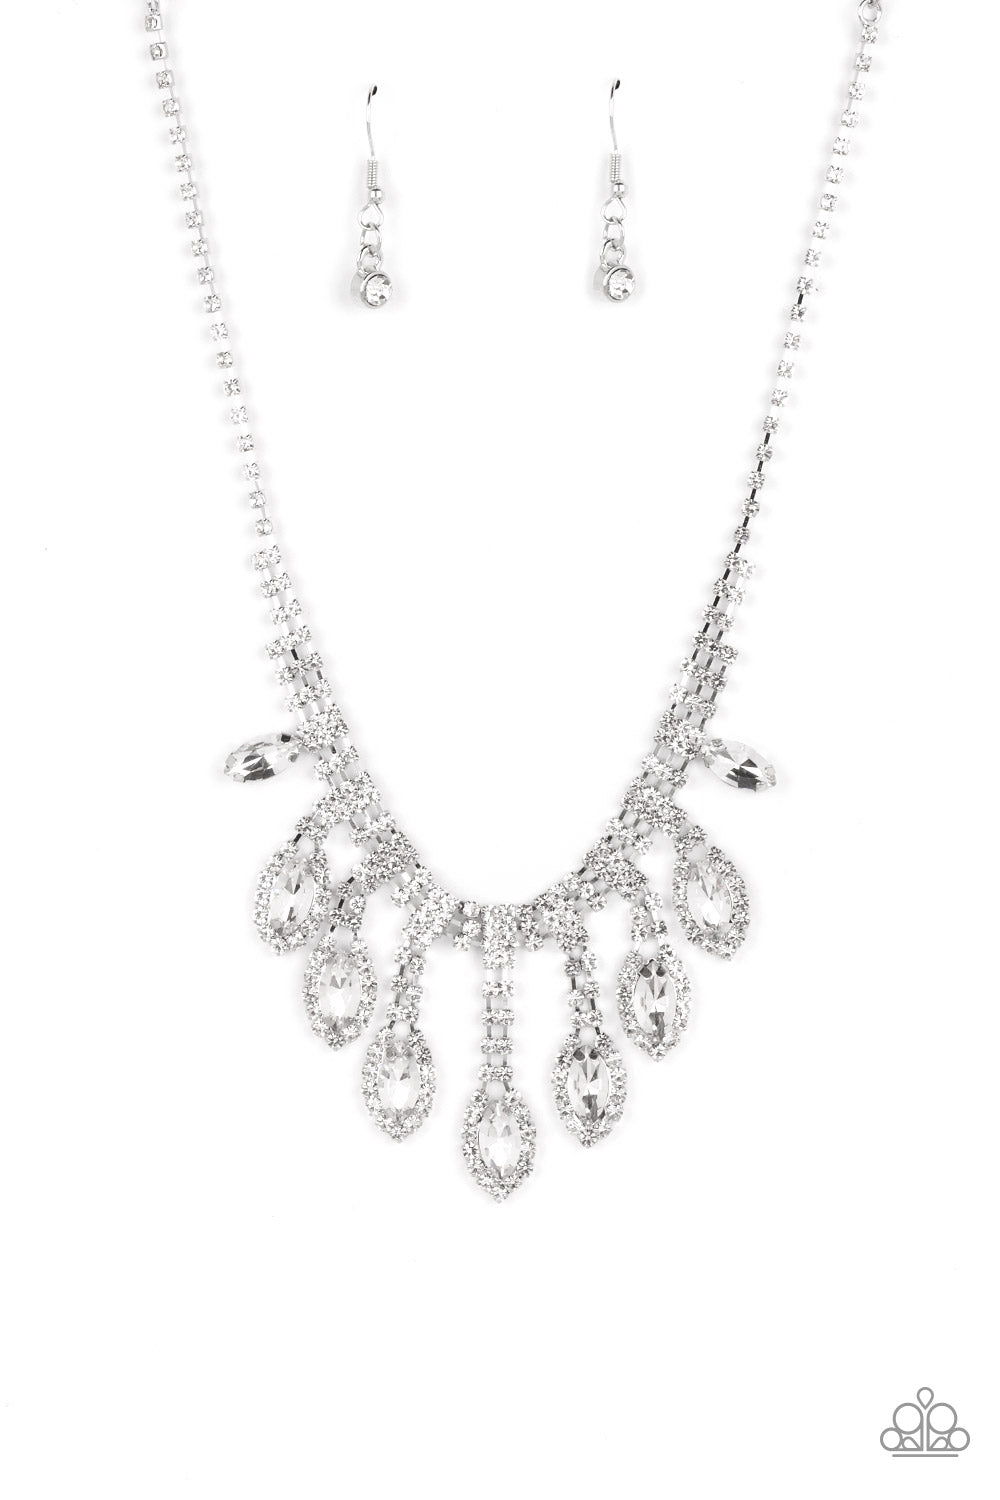 REIGNING Romance - White Necklace Set November 2022 Life of the Party Exclusive - Princess Glam Shop